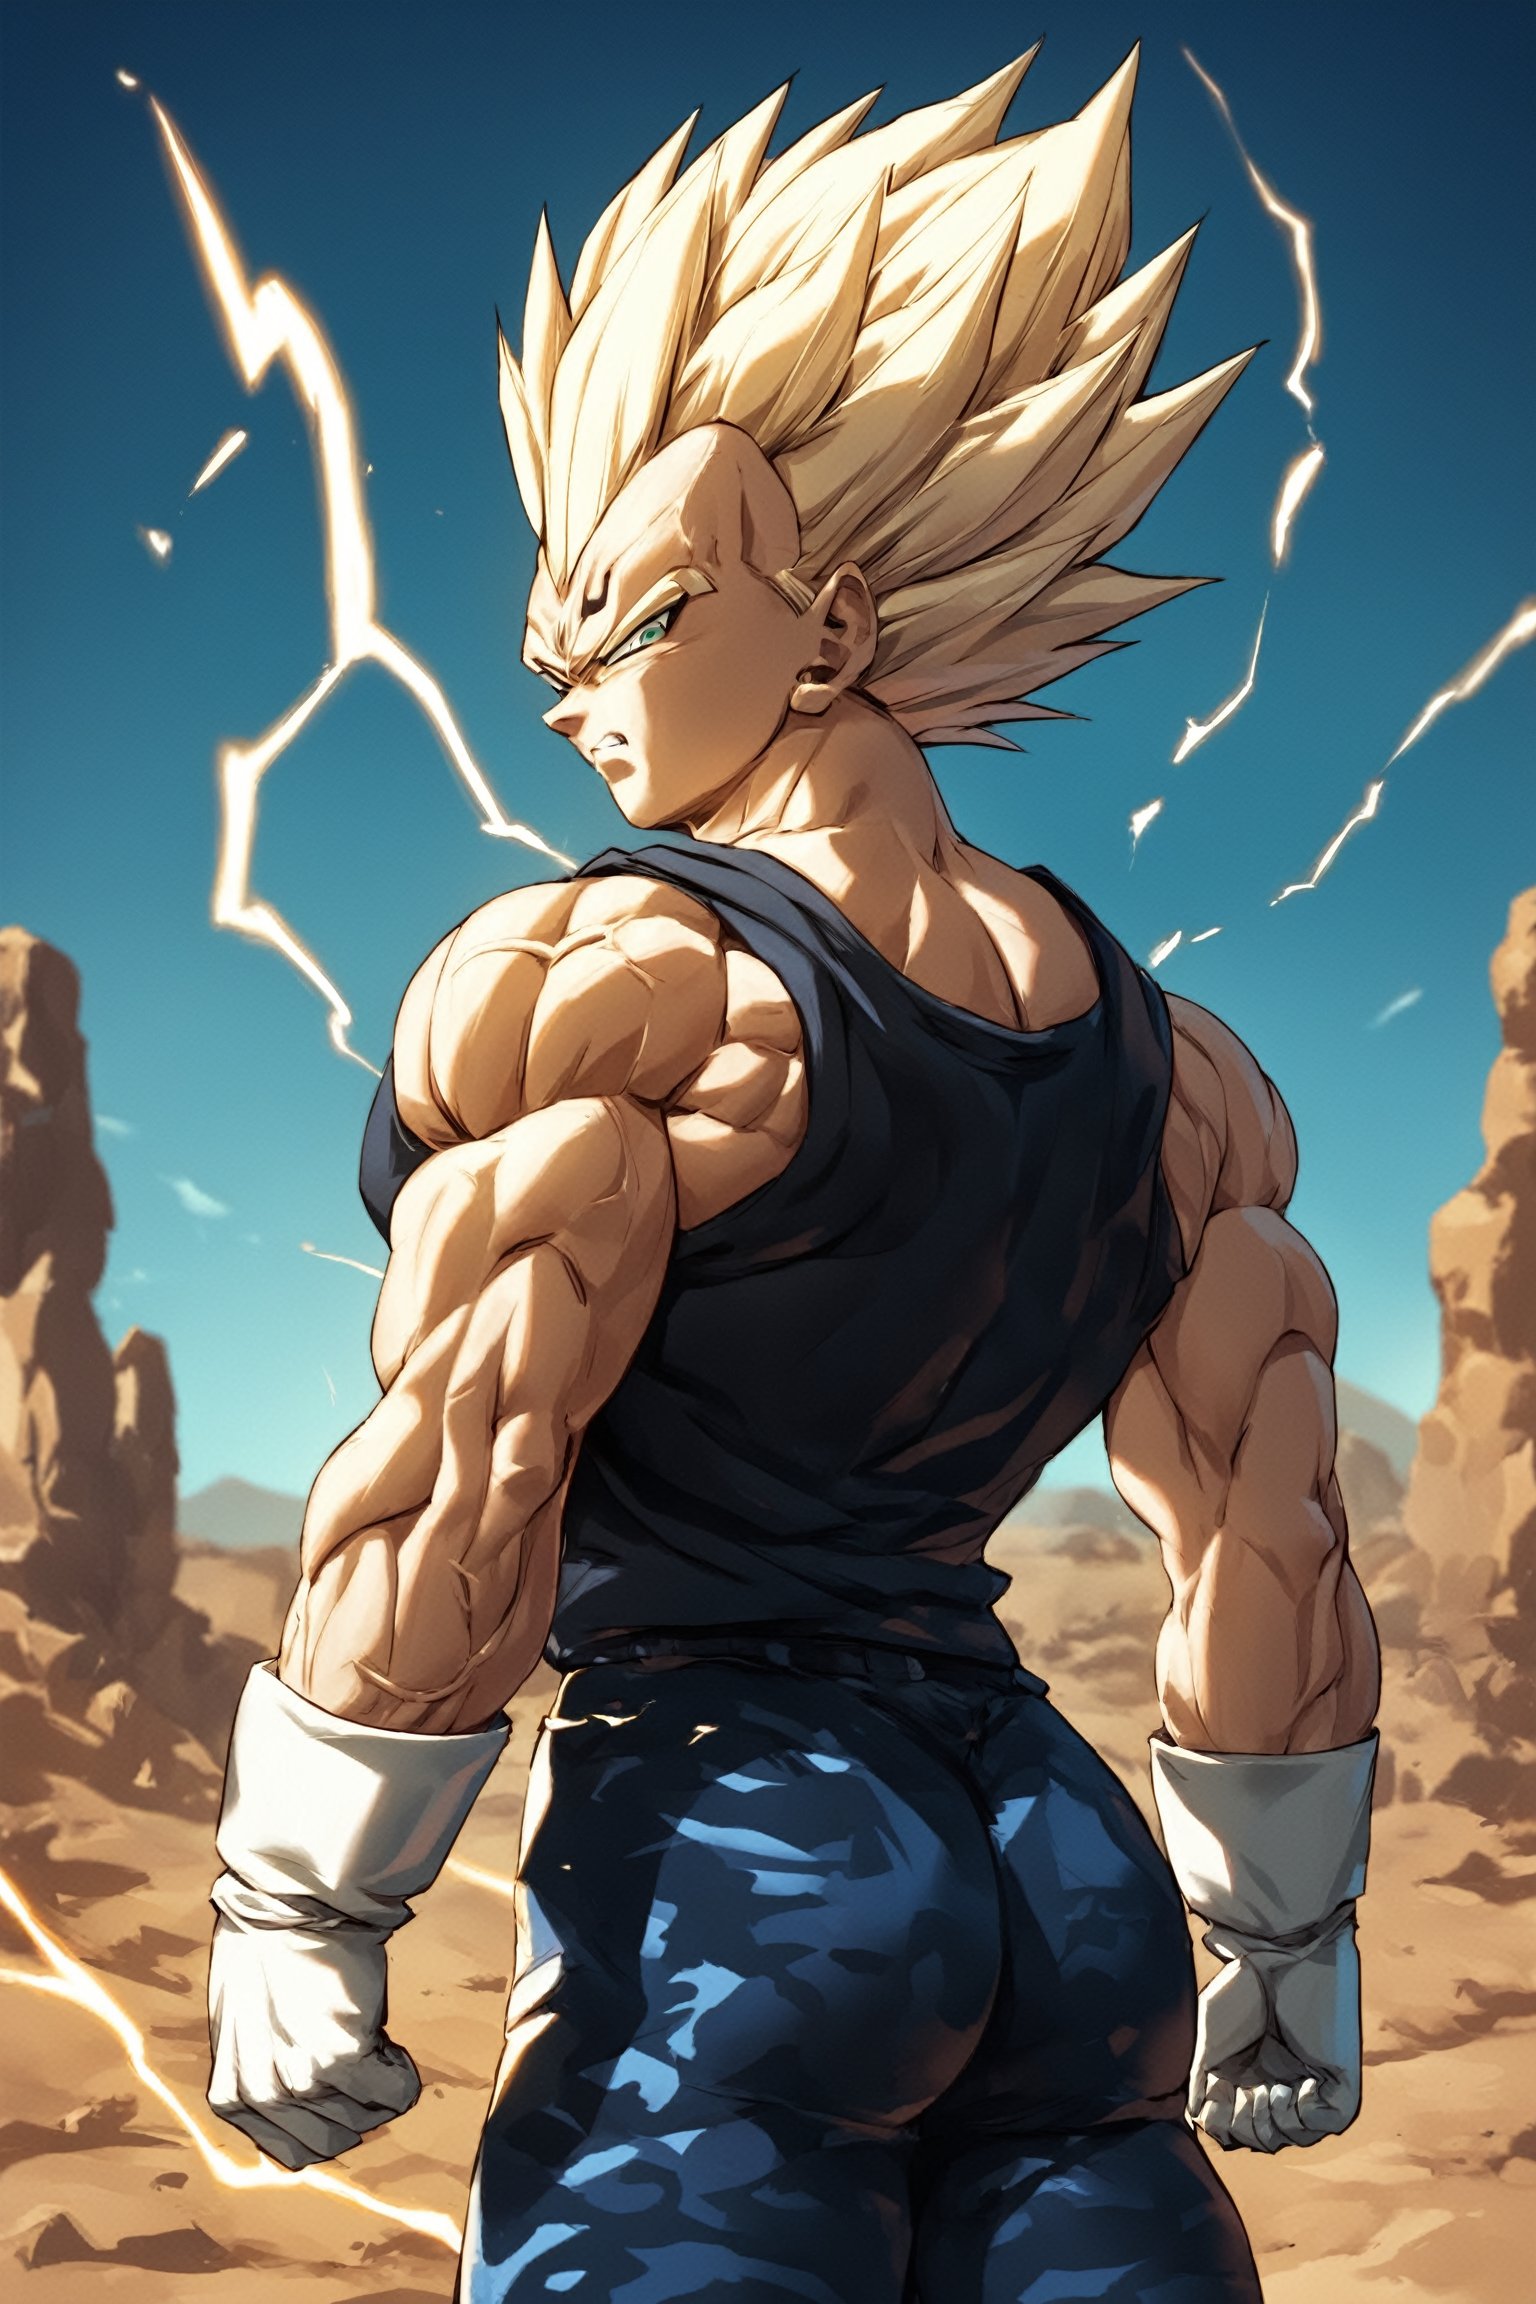 score_9, score_8_up, score_7_up,source_anime, Majin, muscle veins, flexed muscles, Vegeta wearing a black tank top and large camouflage pants, yellow lightning around the character, desert background, looking angry at the viewer, view from behind, looking back at the viewer